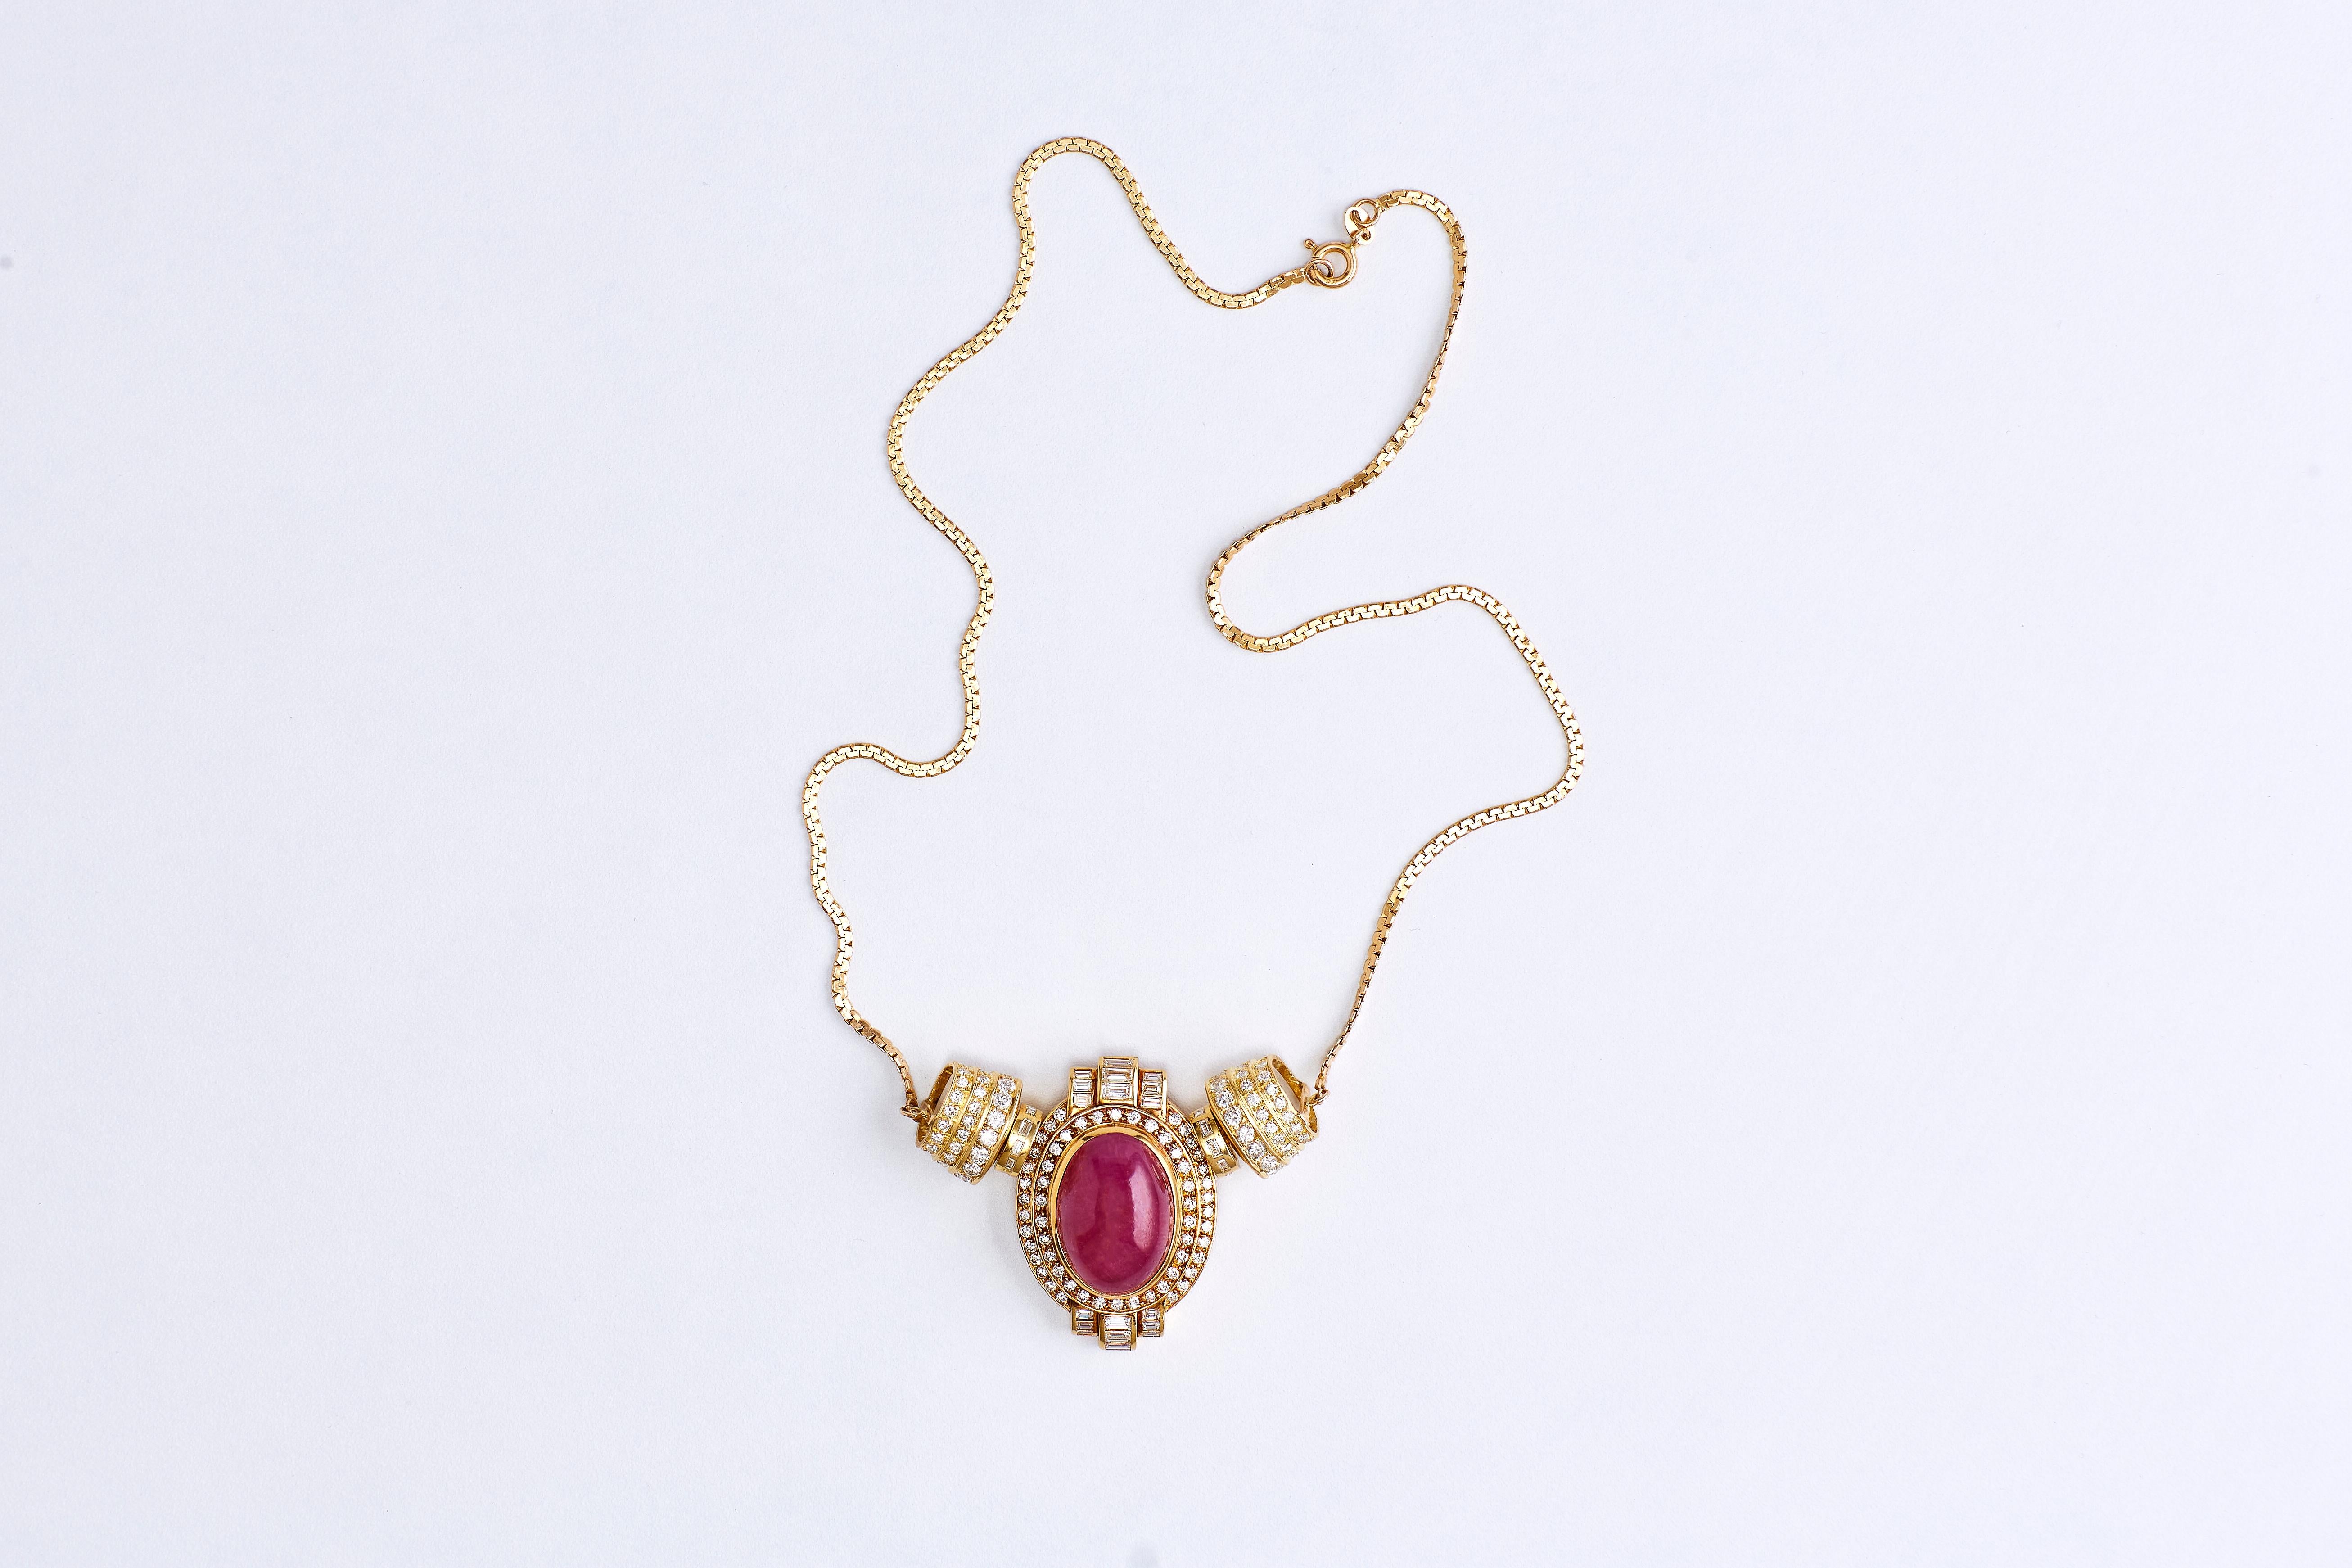 Oval Cut Set of 14 Karat Gold, Ruby and Diamonds Pendant with Chain and Earrings For Sale